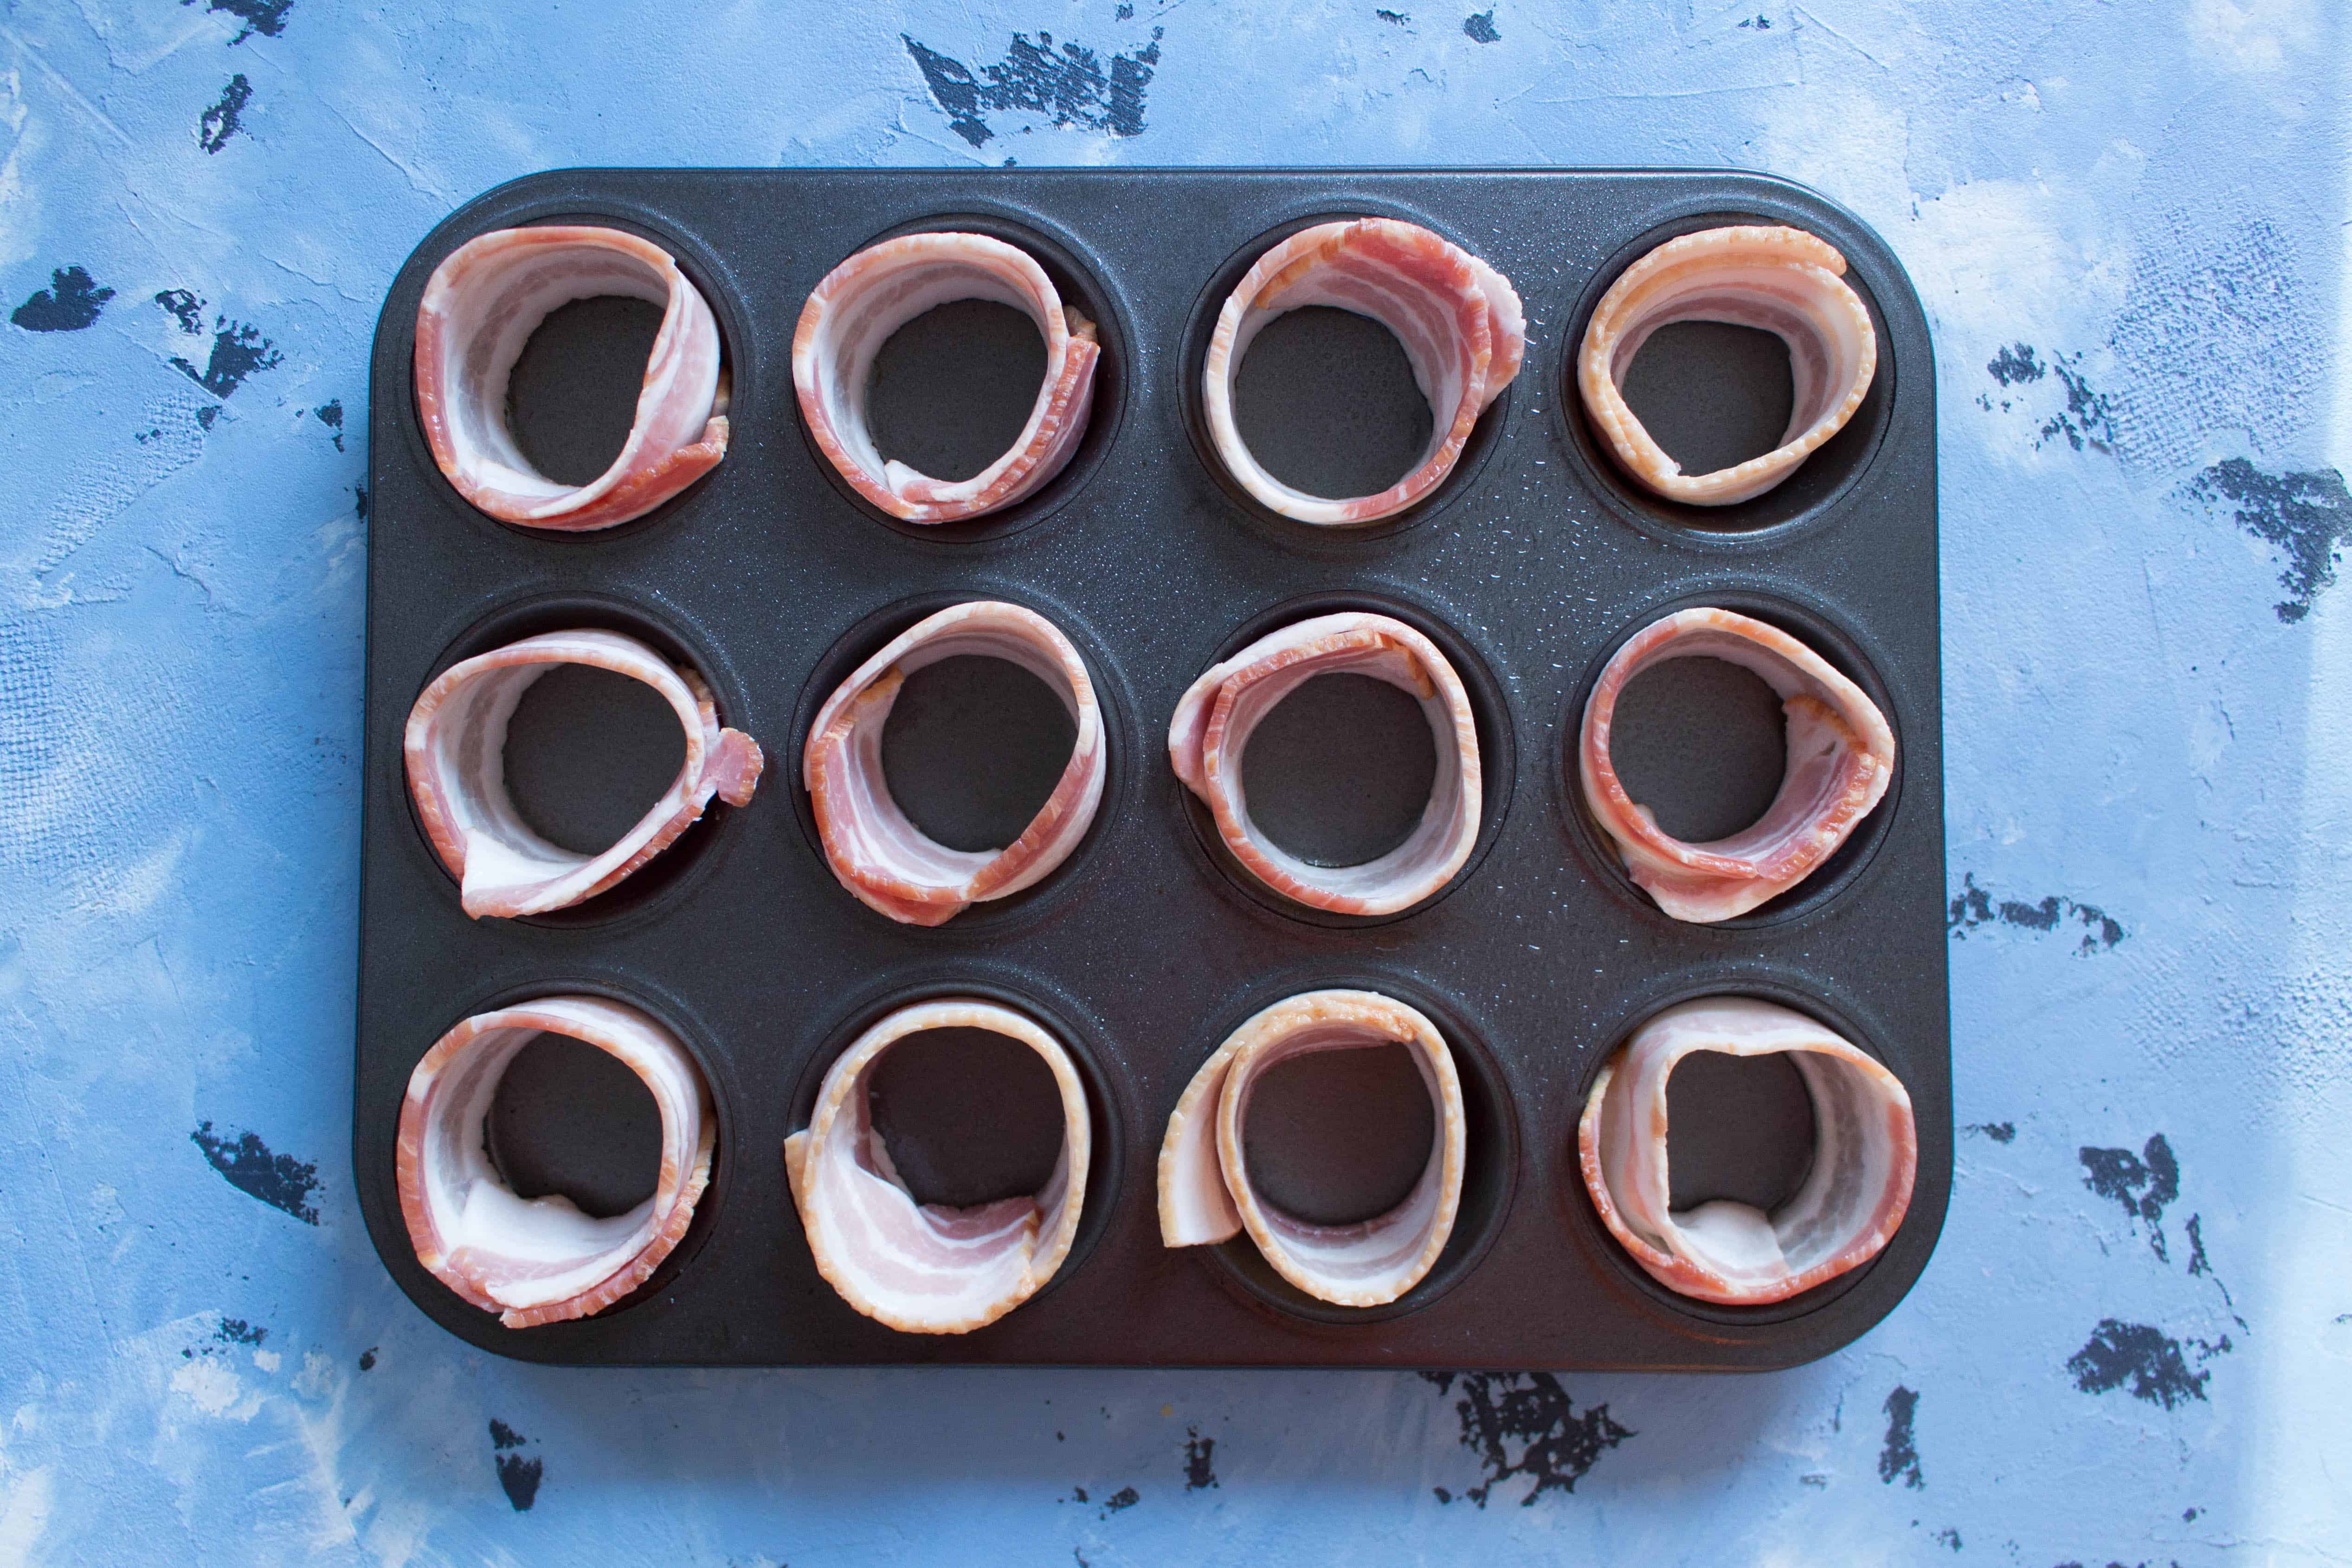 These Freezer Friendly Winter Spice Bacon Egg Cups are a delicious way to start off the day! Nutritious and delicious, these egg cups take less than 30 minutes to make and lasts up to a month in the freezer if you want to batch make them!